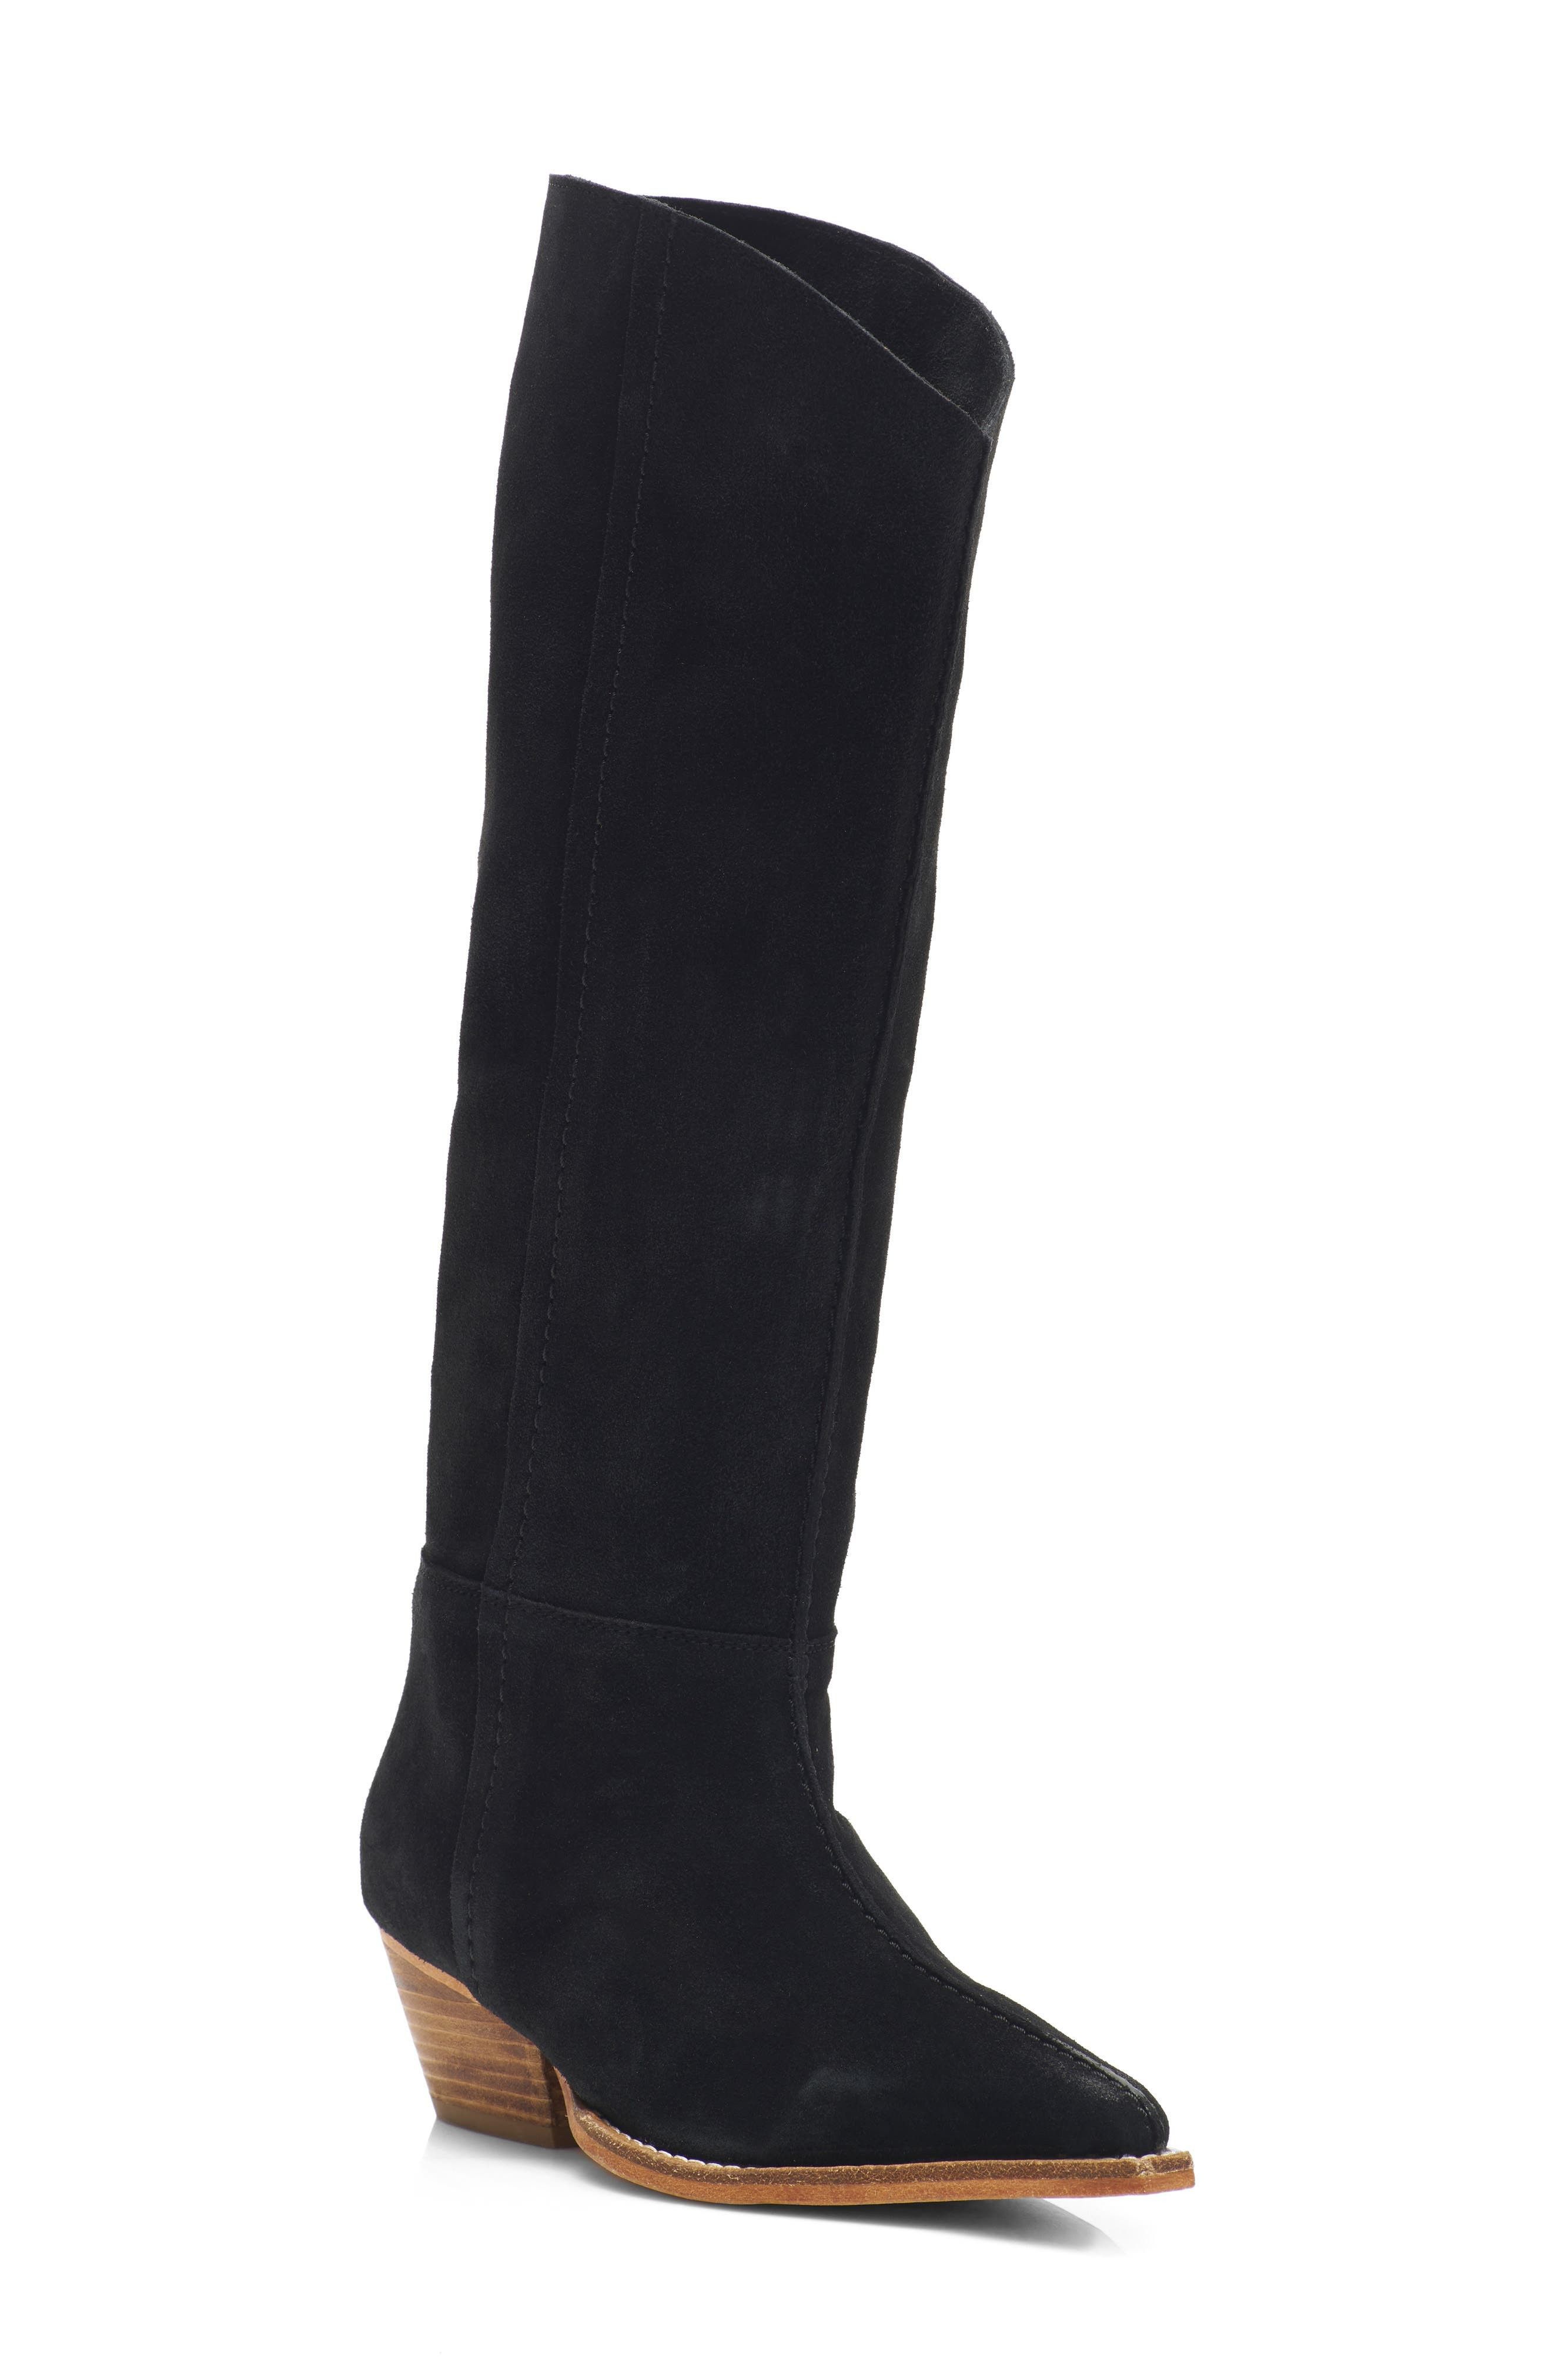 Free People Sway Knee High Boot in Black at Nordstrom, Size 11Us | Nordstrom